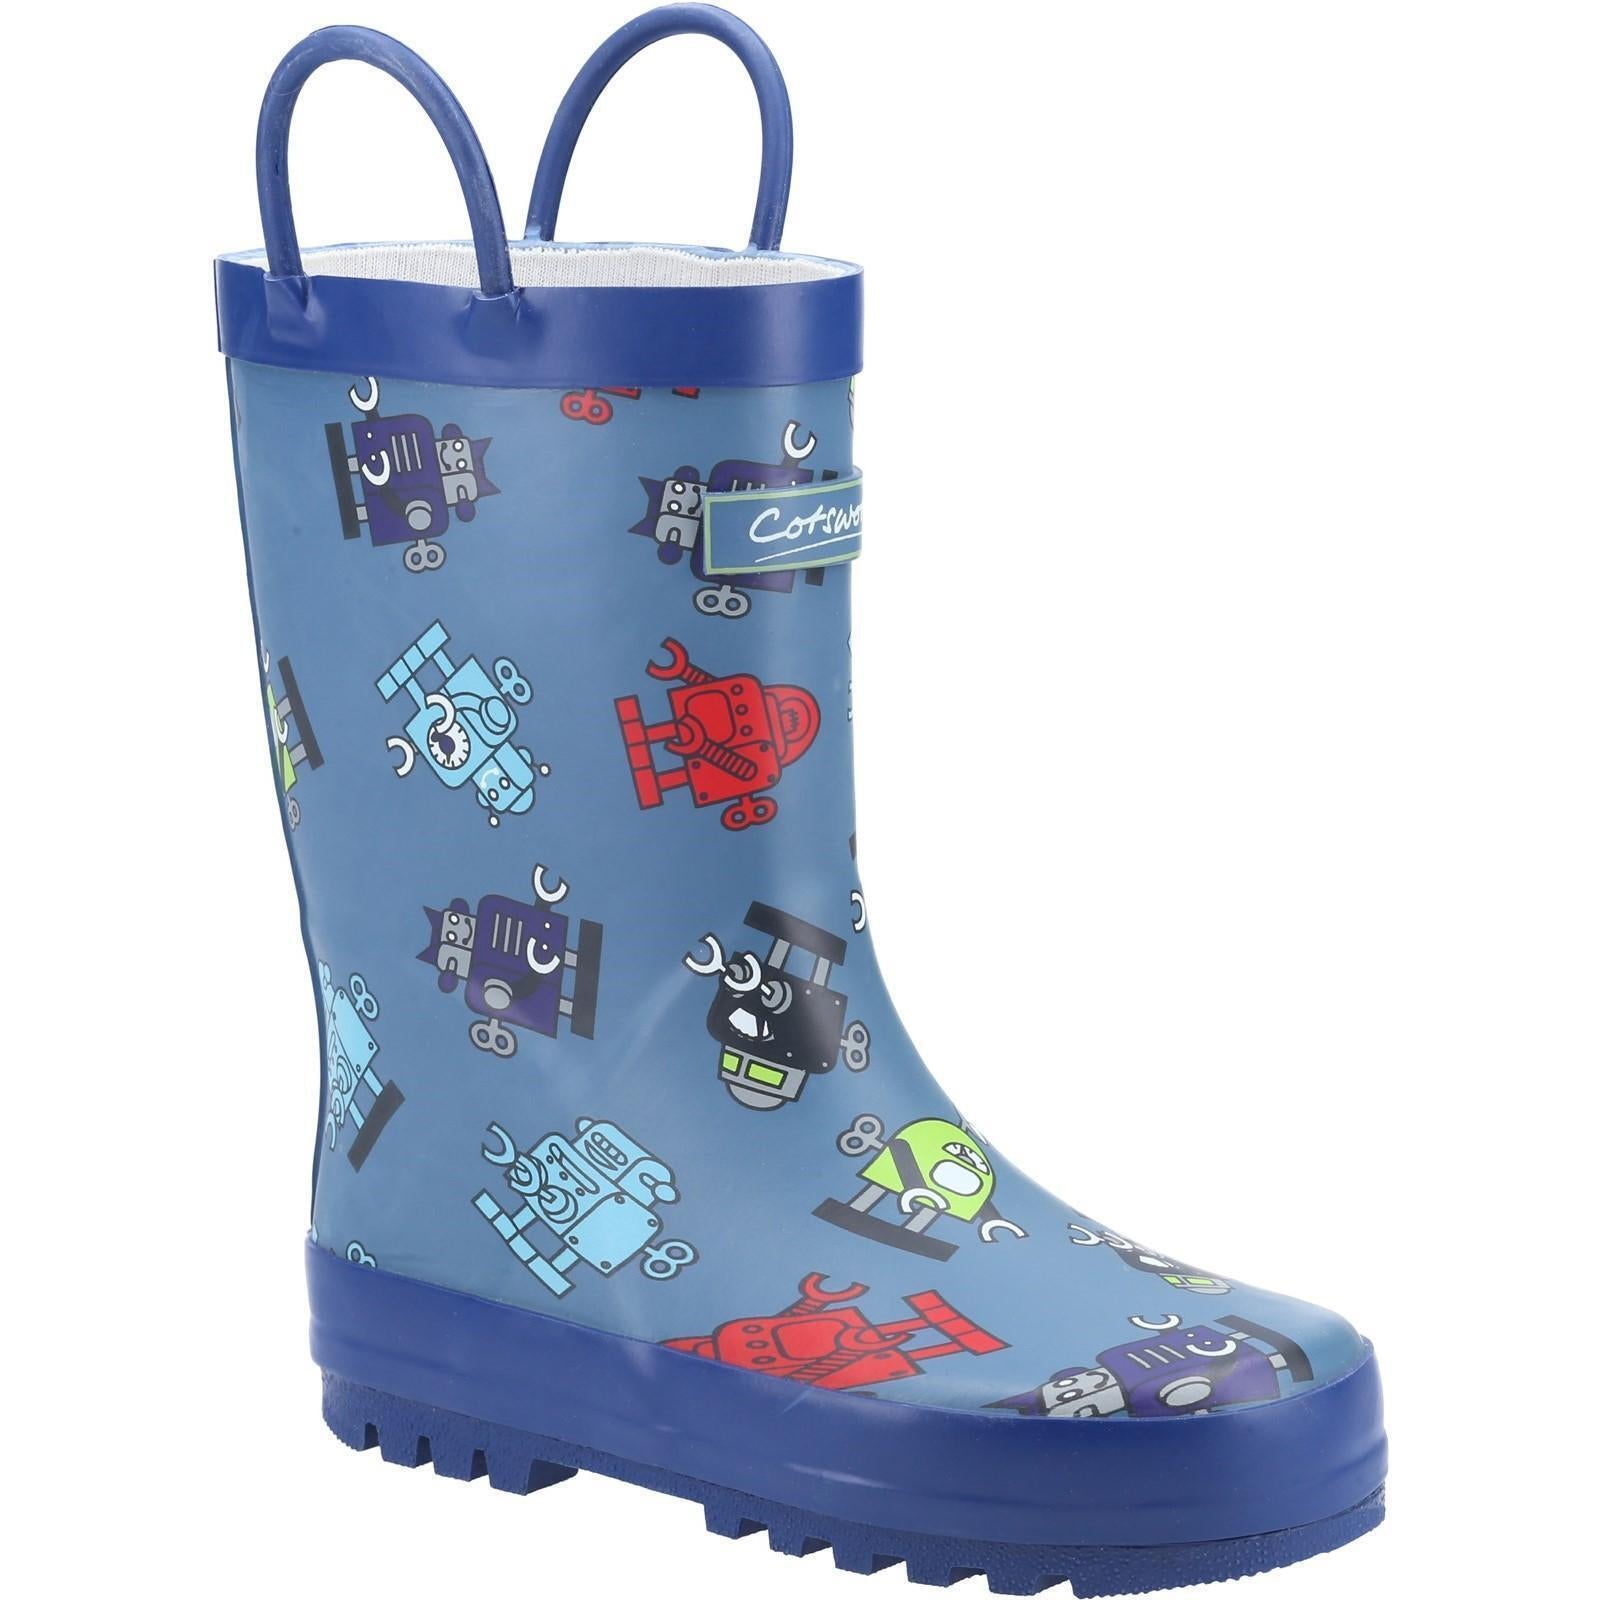 Cotswold Puddle Robot kid's rubber waterproof pull-on wellington boot